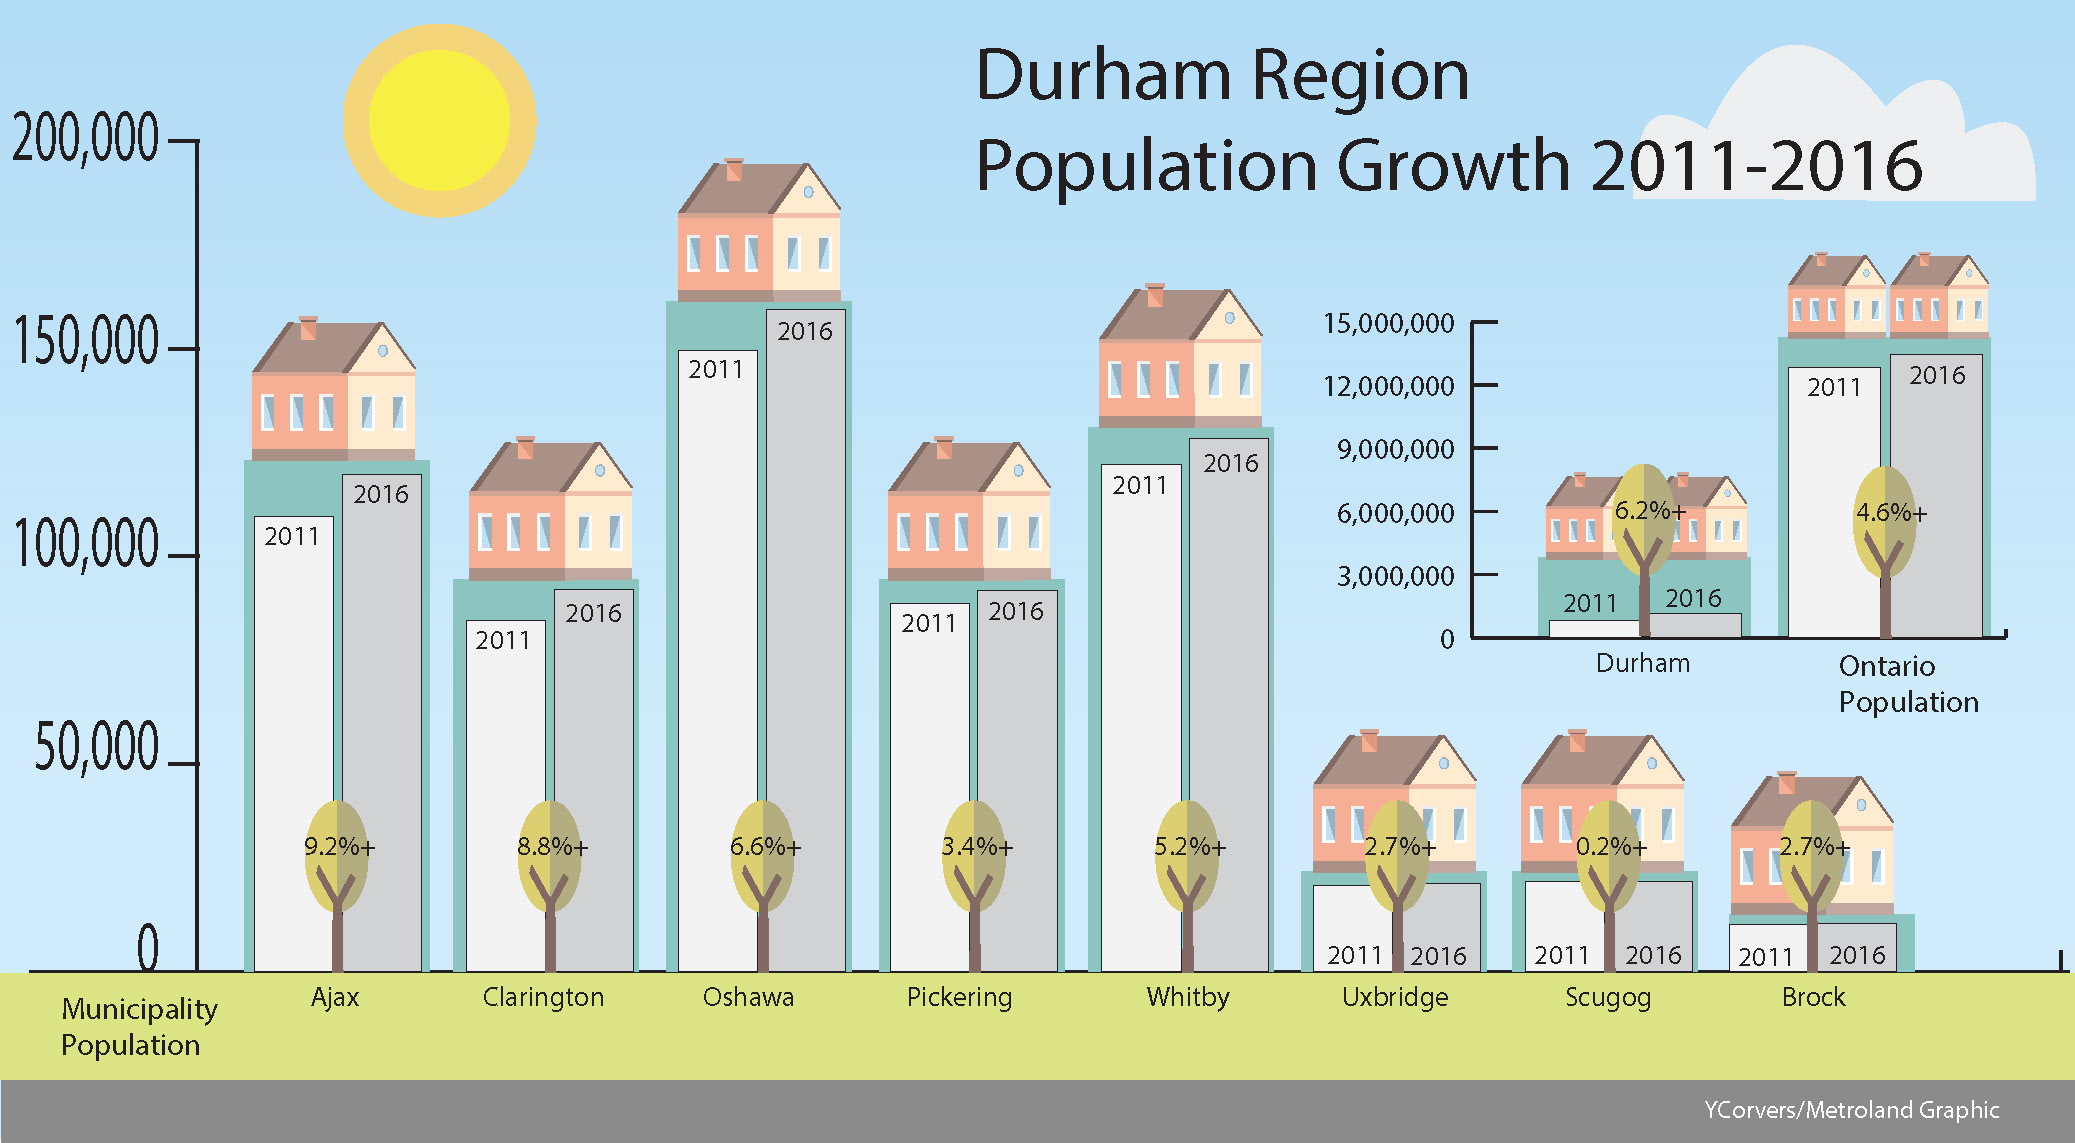 Population growth a mixed blessing for Durham communities